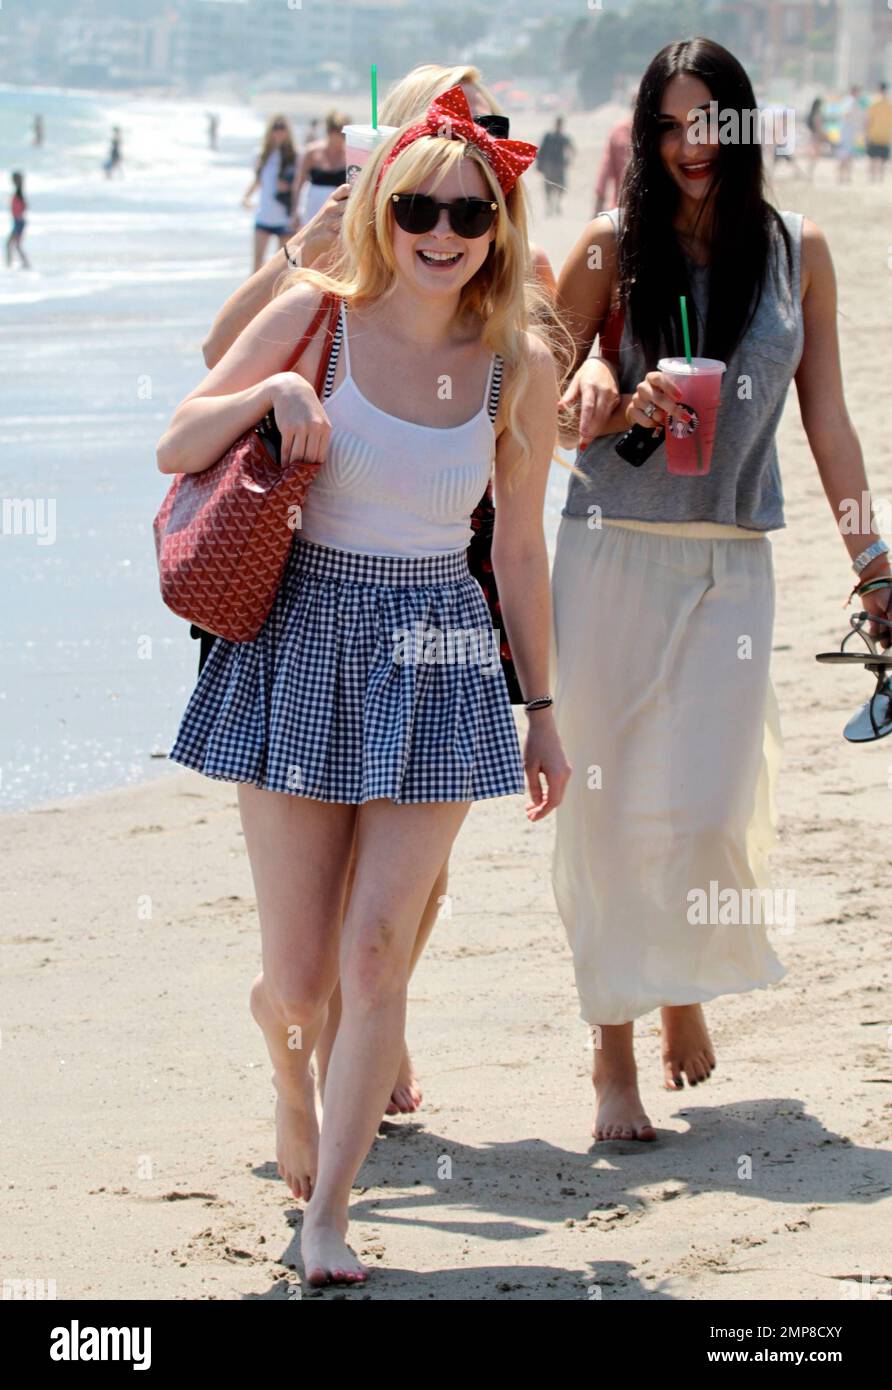 EXCLUSIVE!! Actress Salma Hayek, husband Francois-Henri Pinault and  daughter Valentina end their Fourth of July holiday with a family walk on  the beach. Malibu, CA. 7/4/11 Stock Photo - Alamy